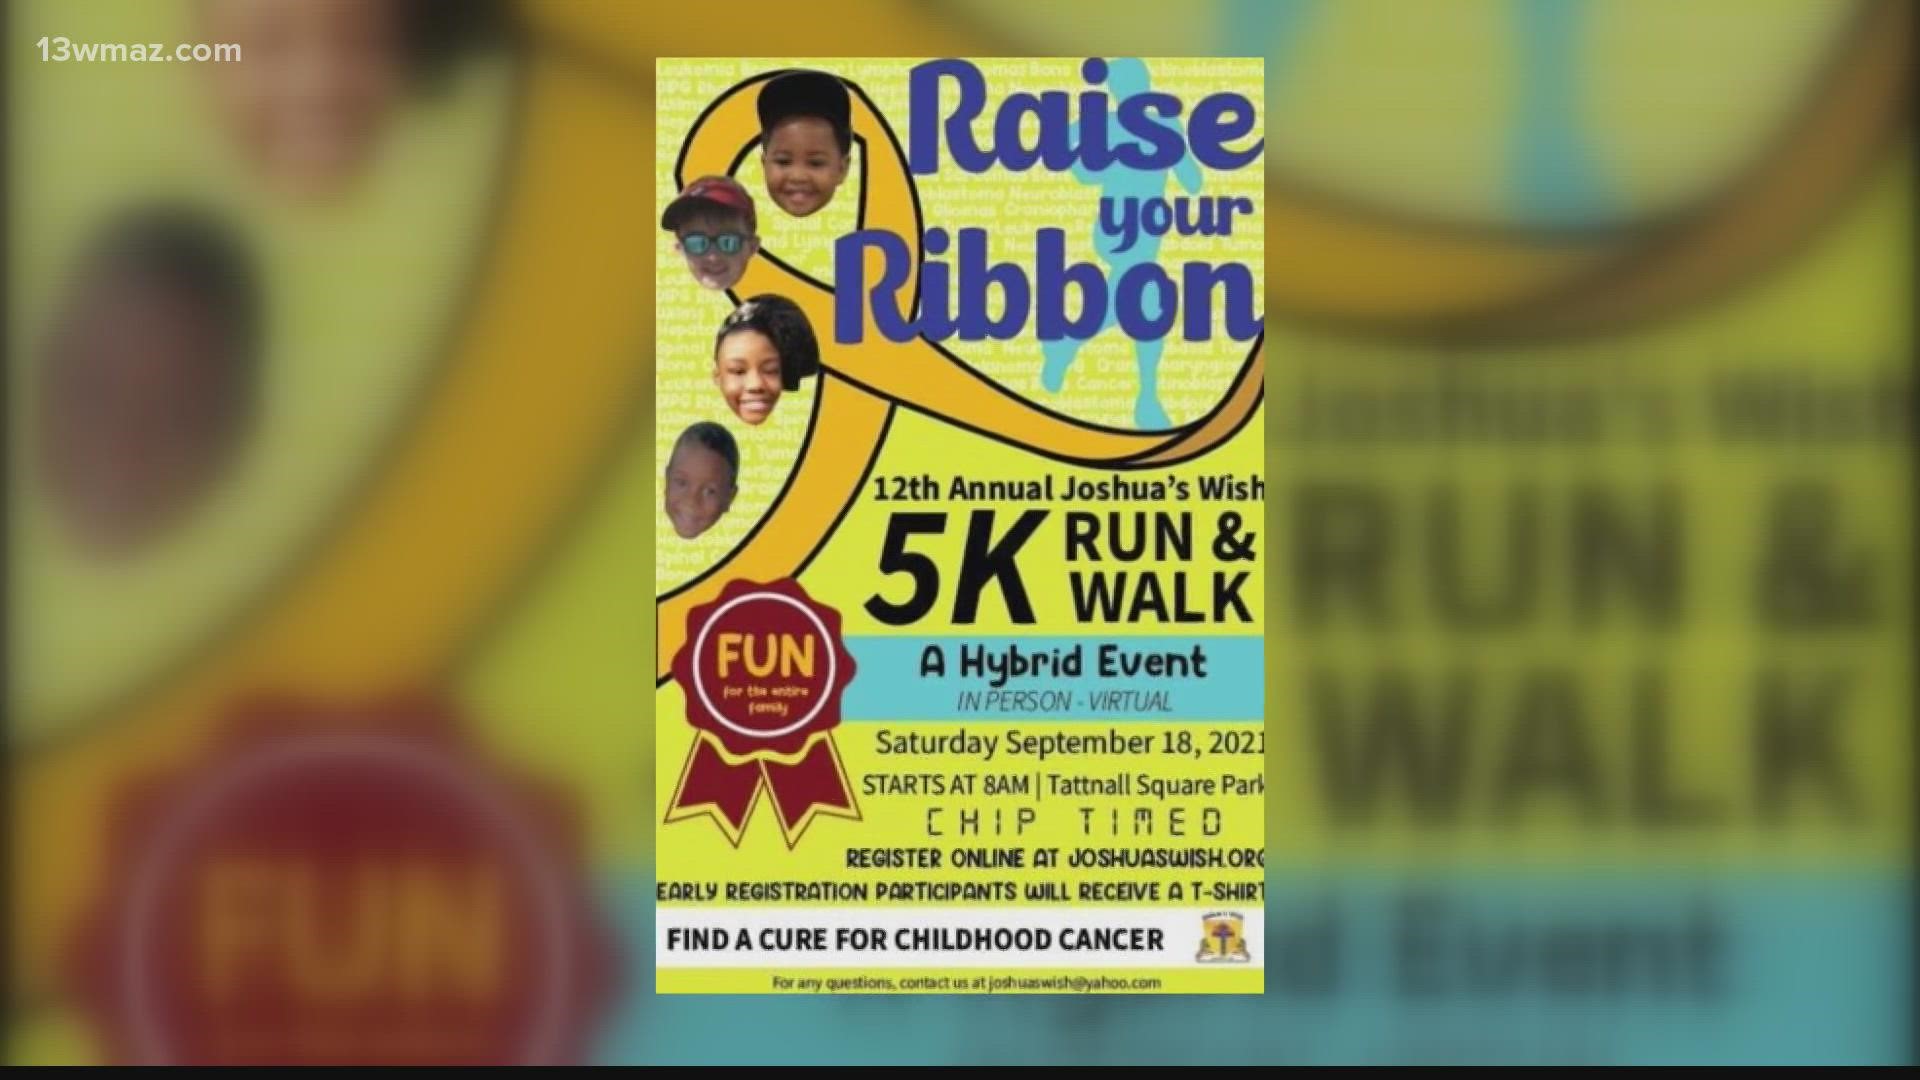 You're encouraged to come out and enjoy a day of fun while raising money to support pediatric cancer research